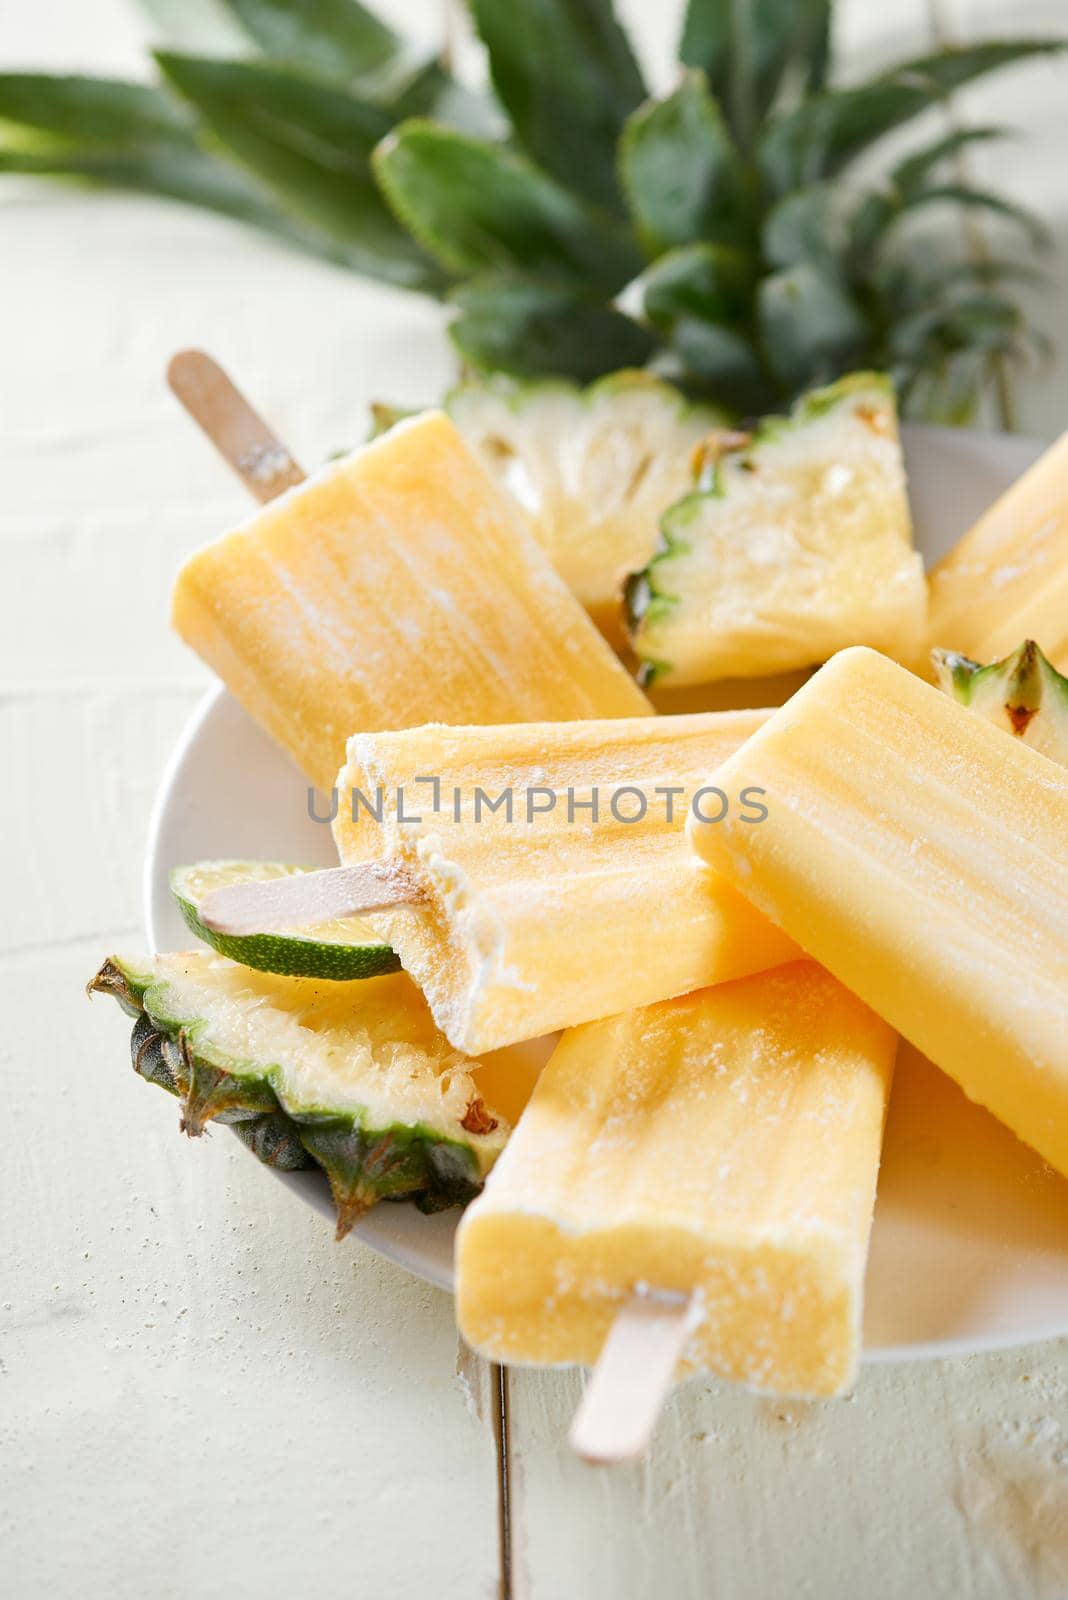 Pineapple coconut popsicles in a cluster on wooden white background